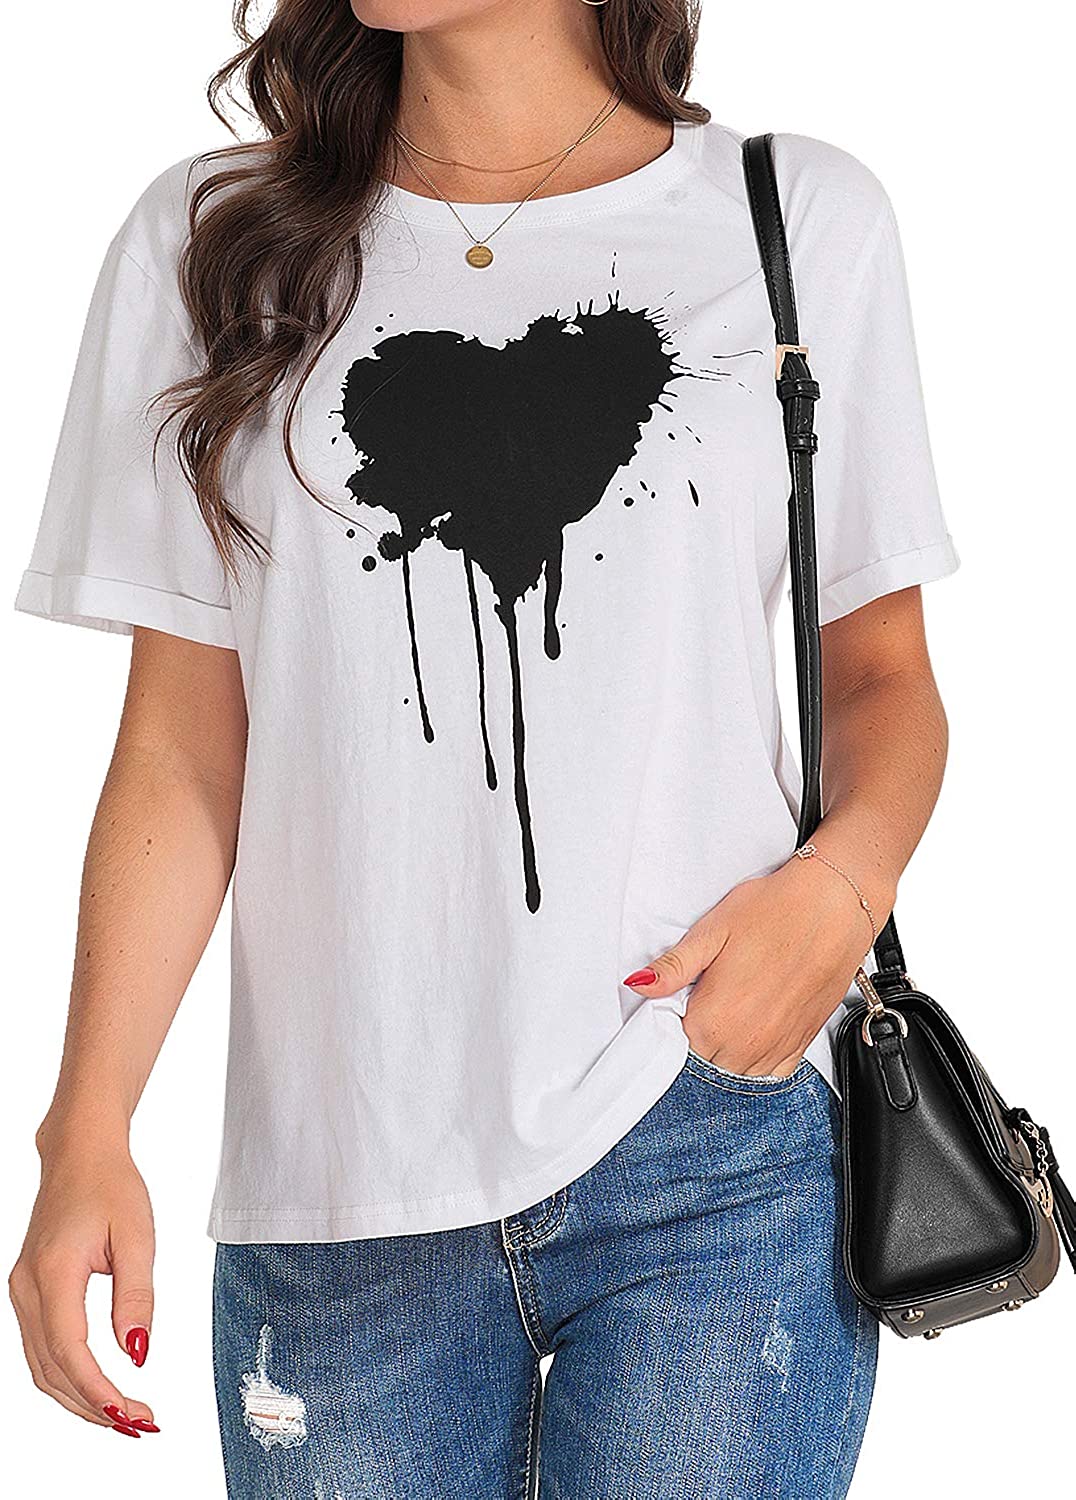 Blooming Jelly Womens Graphic Tees Short Sleeve Crew Neck, White, Size ...